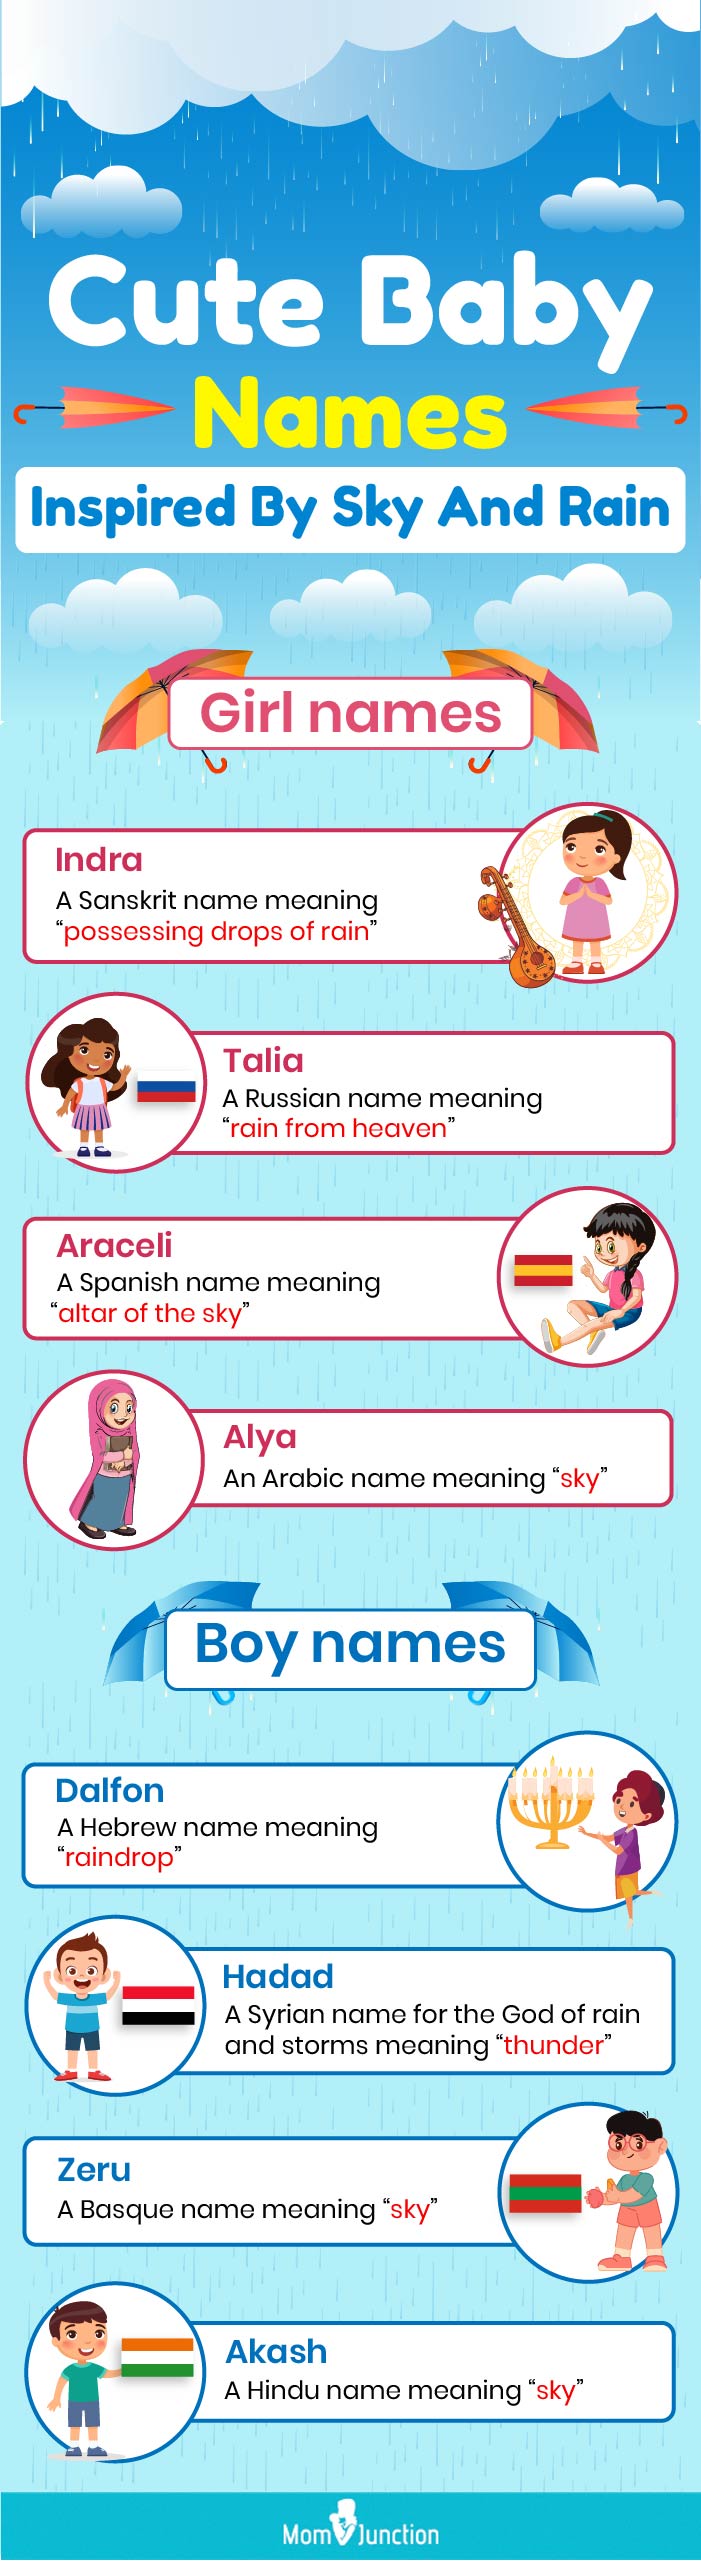 cute baby names inspired by sky and rain [infographic]